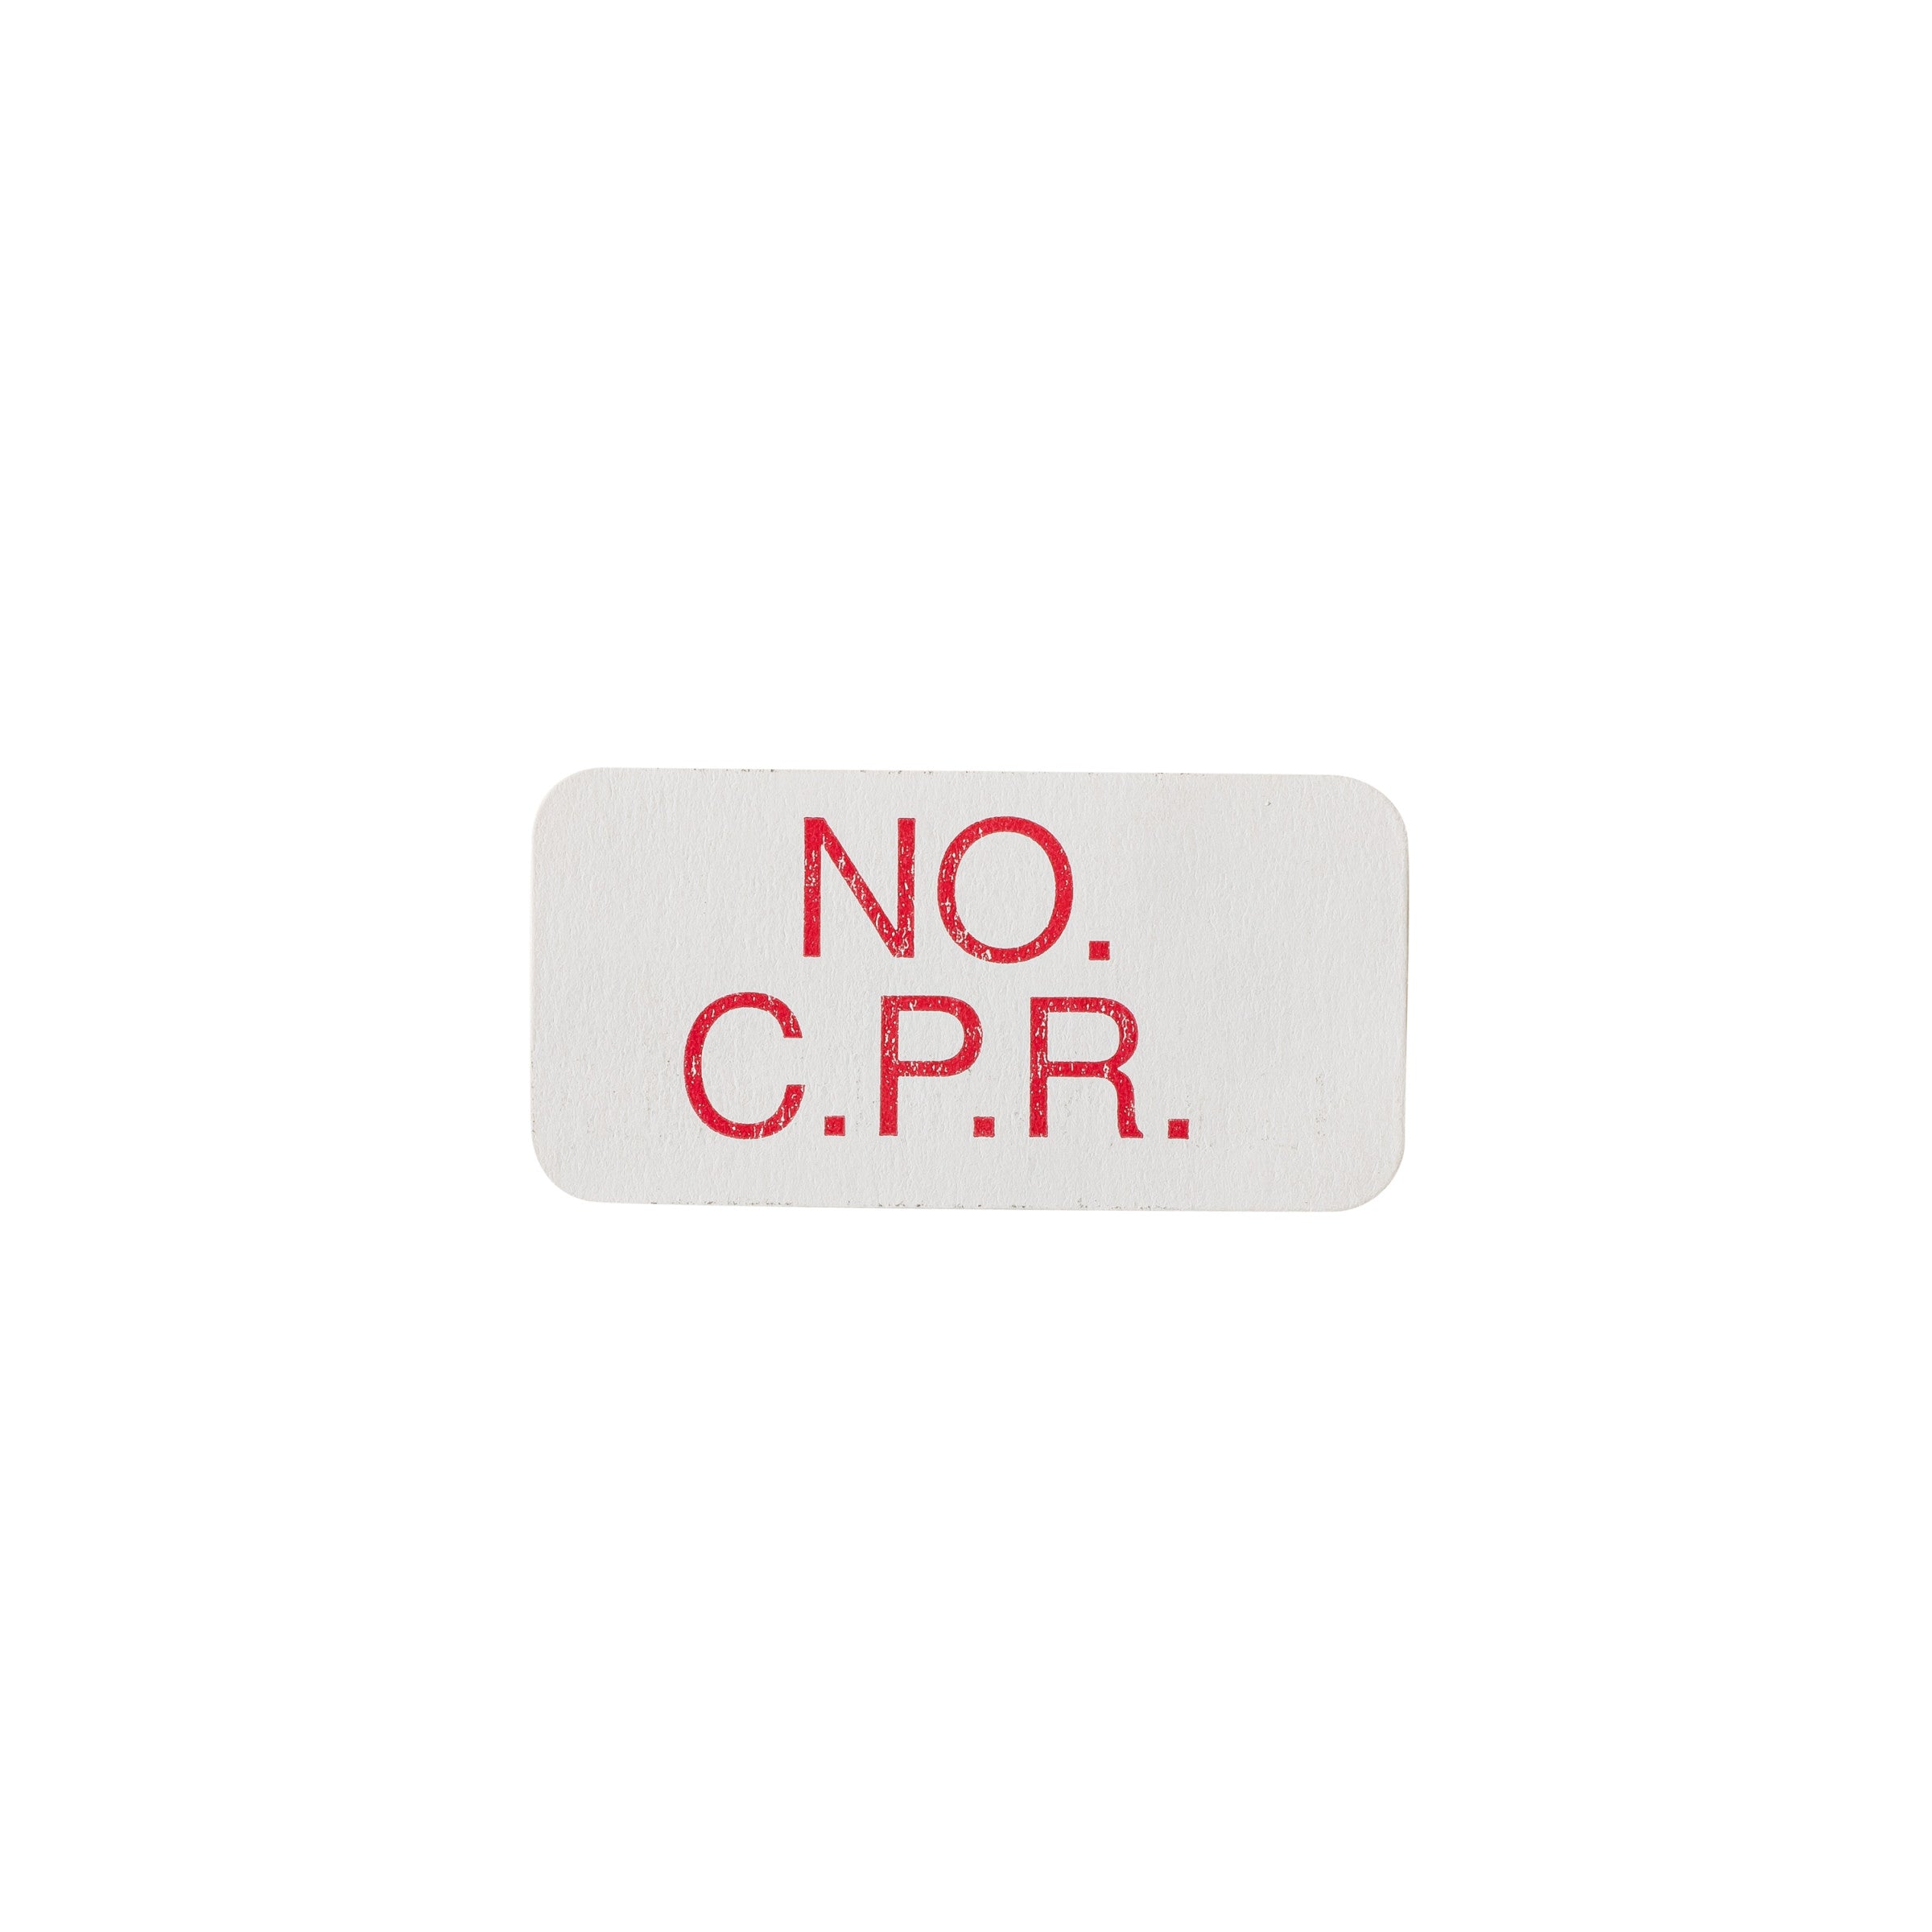 No CPR Alert and Instruction Labels, White, W1.5" x H.75" (Roll of 100)